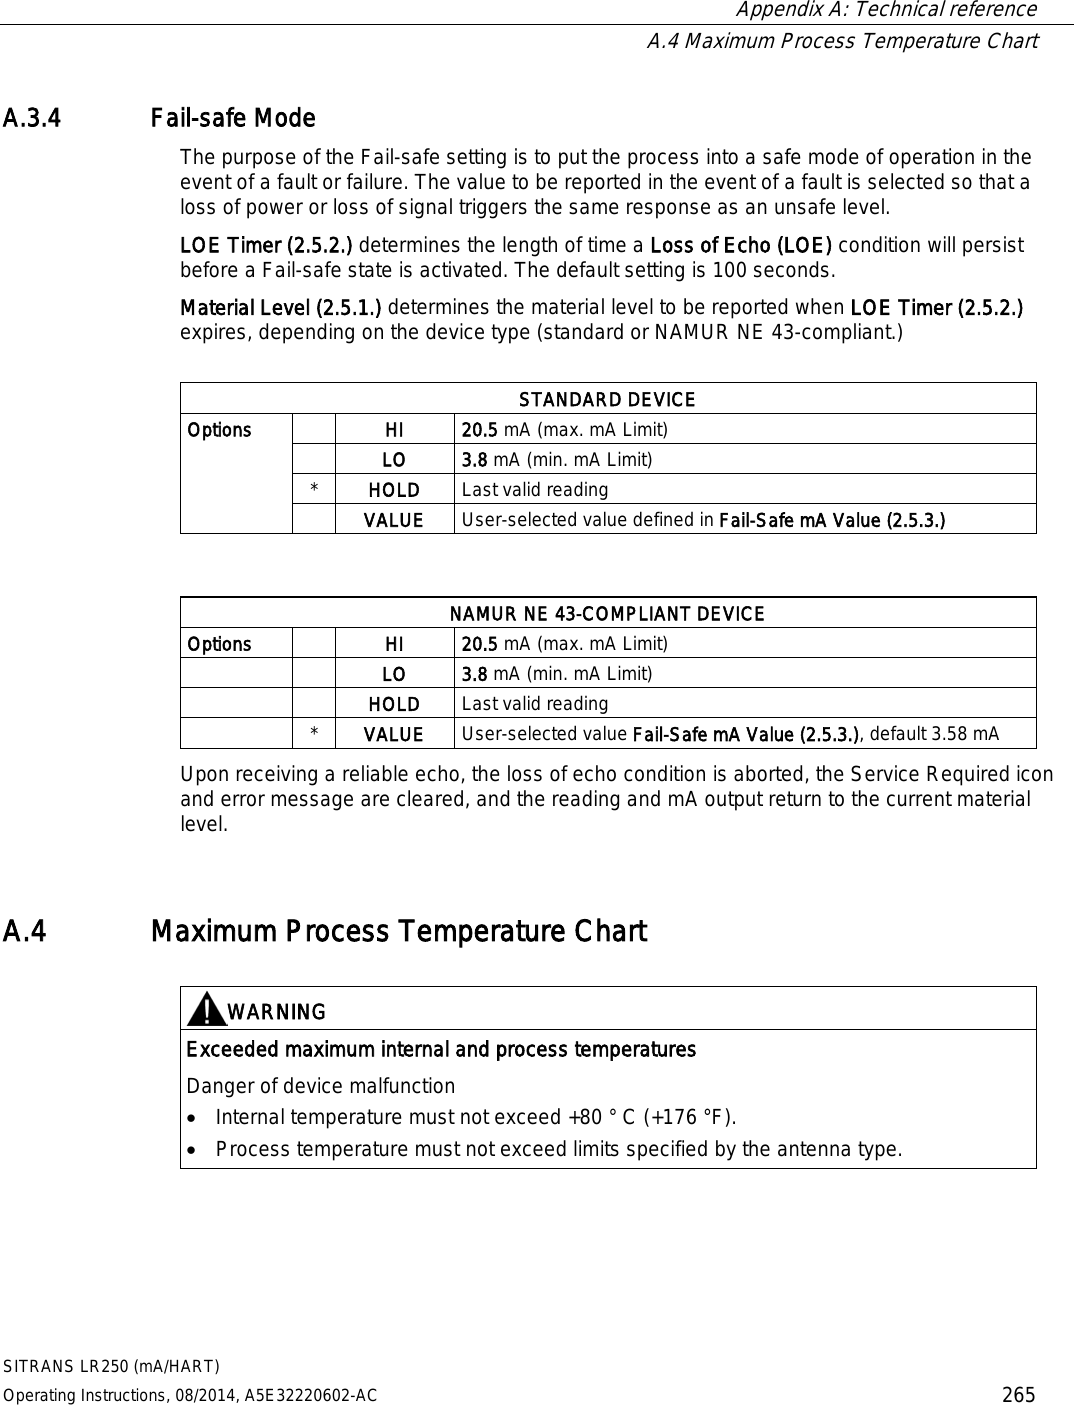  Appendix A: Technical reference  A.4 Maximum Process Temperature Chart SITRANS LR250 (mA/HART) Operating Instructions, 08/2014, A5E32220602-AC 265 A.3.4 Fail-safe Mode The purpose of the Fail-safe setting is to put the process into a safe mode of operation in the event of a fault or failure. The value to be reported in the event of a fault is selected so that a loss of power or loss of signal triggers the same response as an unsafe level. LOE Timer (2.5.2.) determines the length of time a Loss of Echo (LOE) condition will persist before a Fail-safe state is activated. The default setting is 100 seconds. Material Level (2.5.1.) determines the material level to be reported when LOE Timer (2.5.2.) expires, depending on the device type (standard or NAMUR NE 43-compliant.)  STANDARD DEVICE Options  HI 20.5 mA (max. mA Limit)  LO 3.8 mA (min. mA Limit) * HOLD Last valid reading  VALUE User-selected value defined in Fail-Safe mA Value (2.5.3.)   NAMUR NE 43-COMPLIANT DEVICE Options  HI 20.5 mA (max. mA Limit)   LO 3.8 mA (min. mA Limit)   HOLD Last valid reading  * VALUE User-selected value Fail-Safe mA Value (2.5.3.), default 3.58 mA Upon receiving a reliable echo, the loss of echo condition is aborted, the Service Required icon and error message are cleared, and the reading and mA output return to the current material level. A.4 Maximum Process Temperature Chart   WARNING Exceeded maximum internal and process temperatures Danger of device malfunction • Internal temperature must not exceed +80 ° C (+176 °F). • Process temperature must not exceed limits specified by the antenna type.  